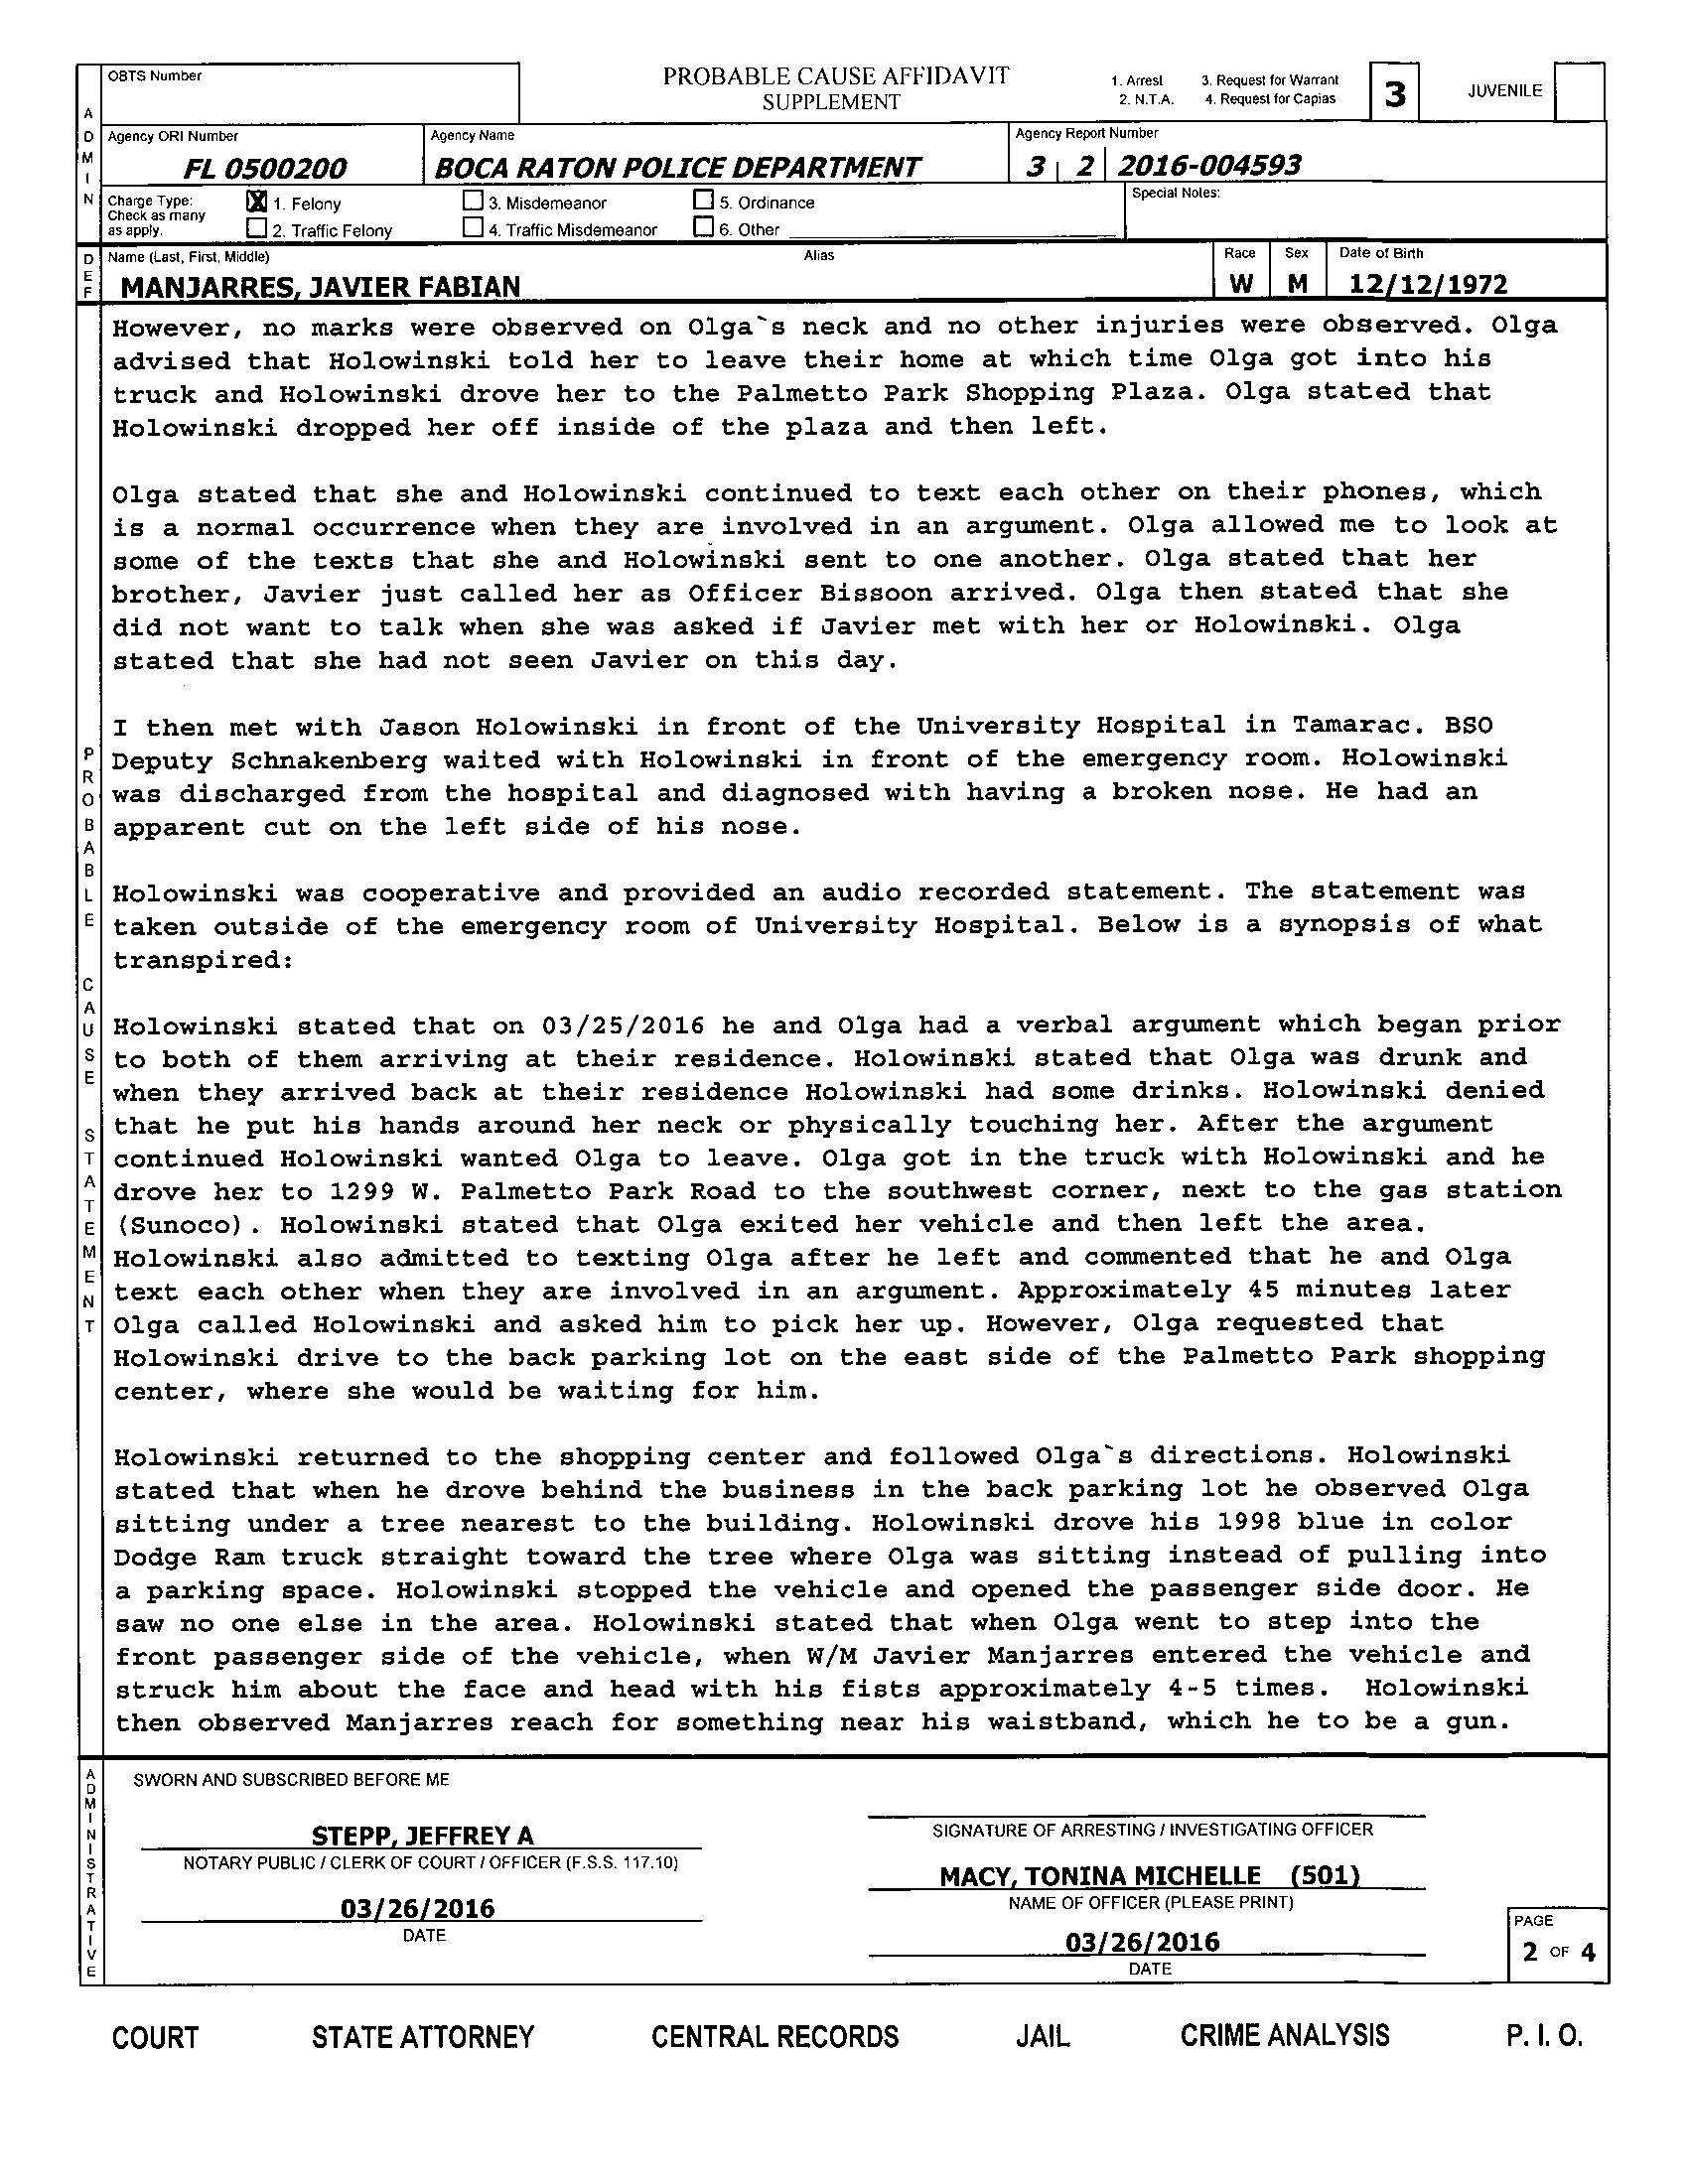 MANJAREES police report_Page_2